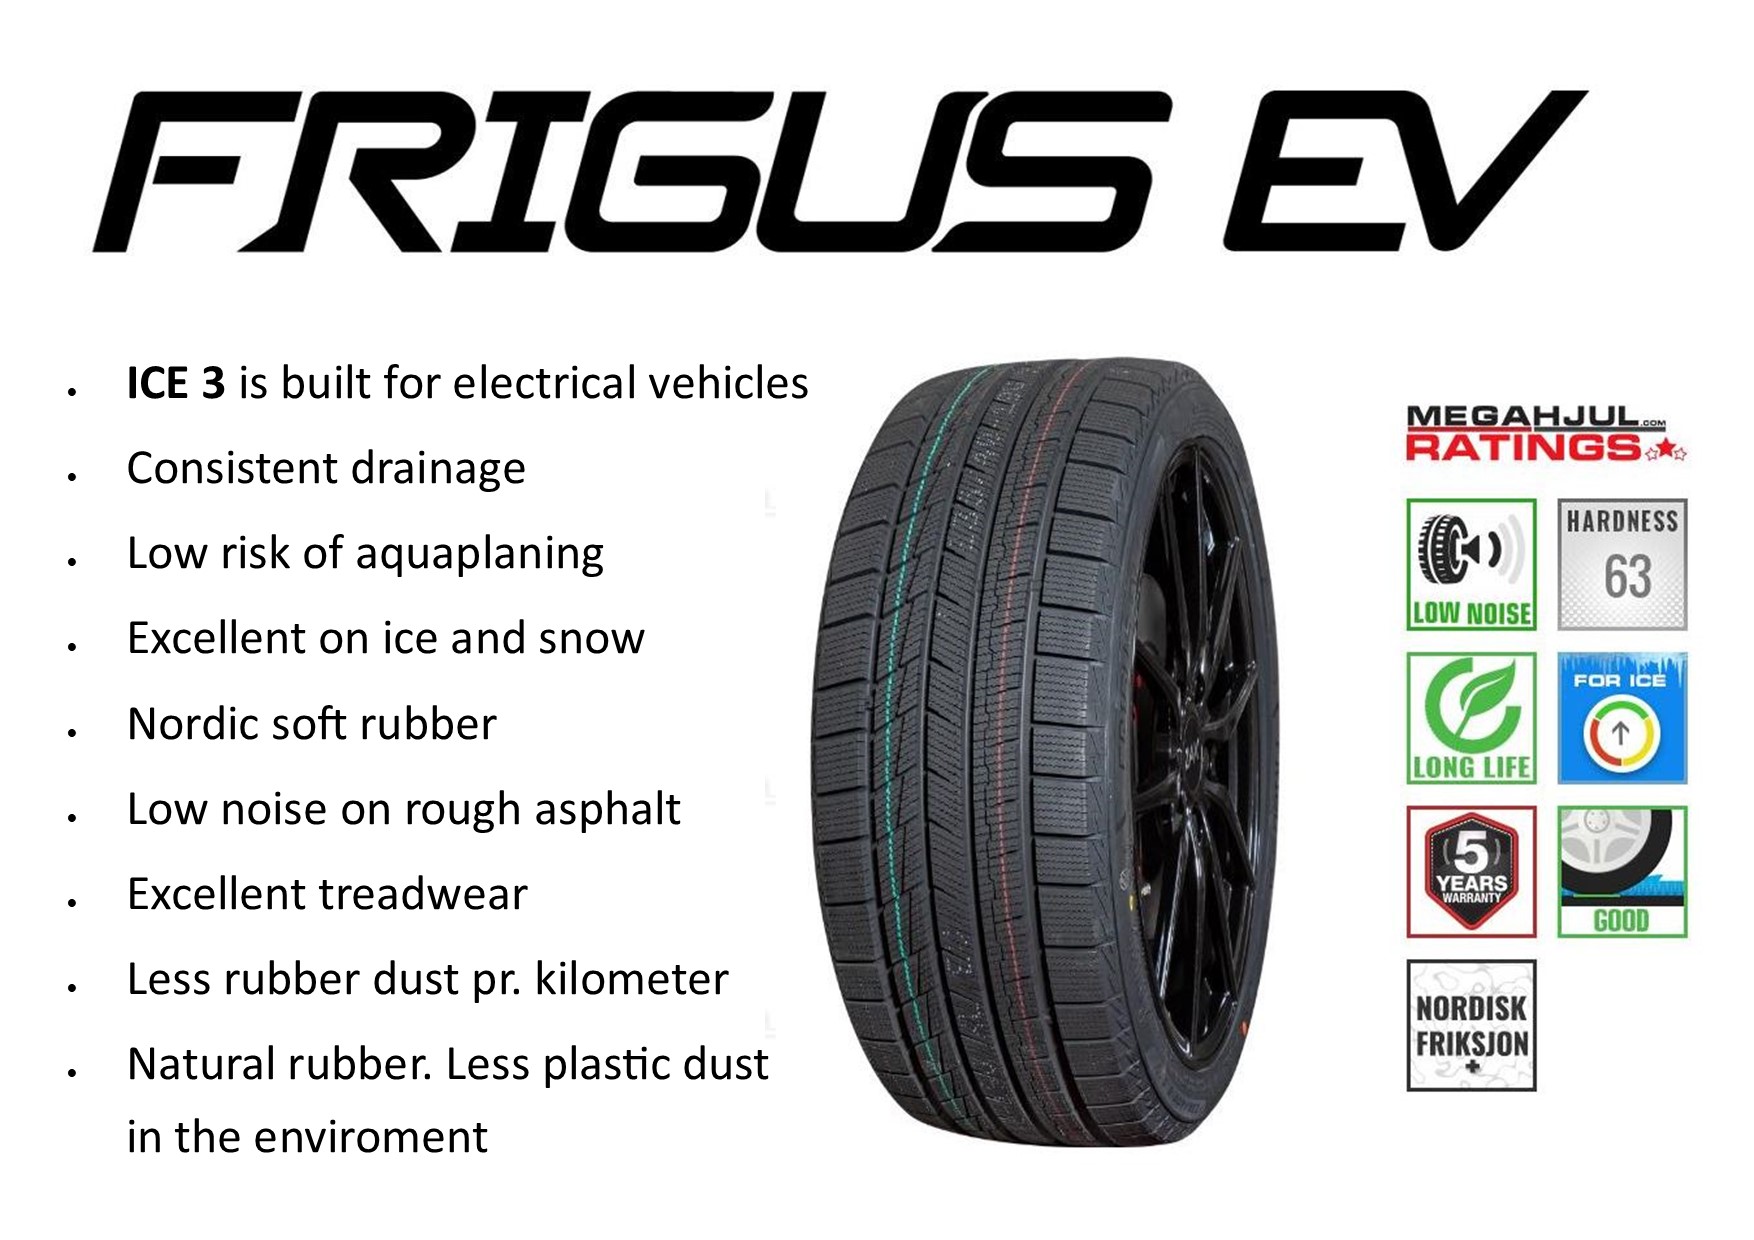 Frigus-ev-winter-tire-for-skilled-drivers